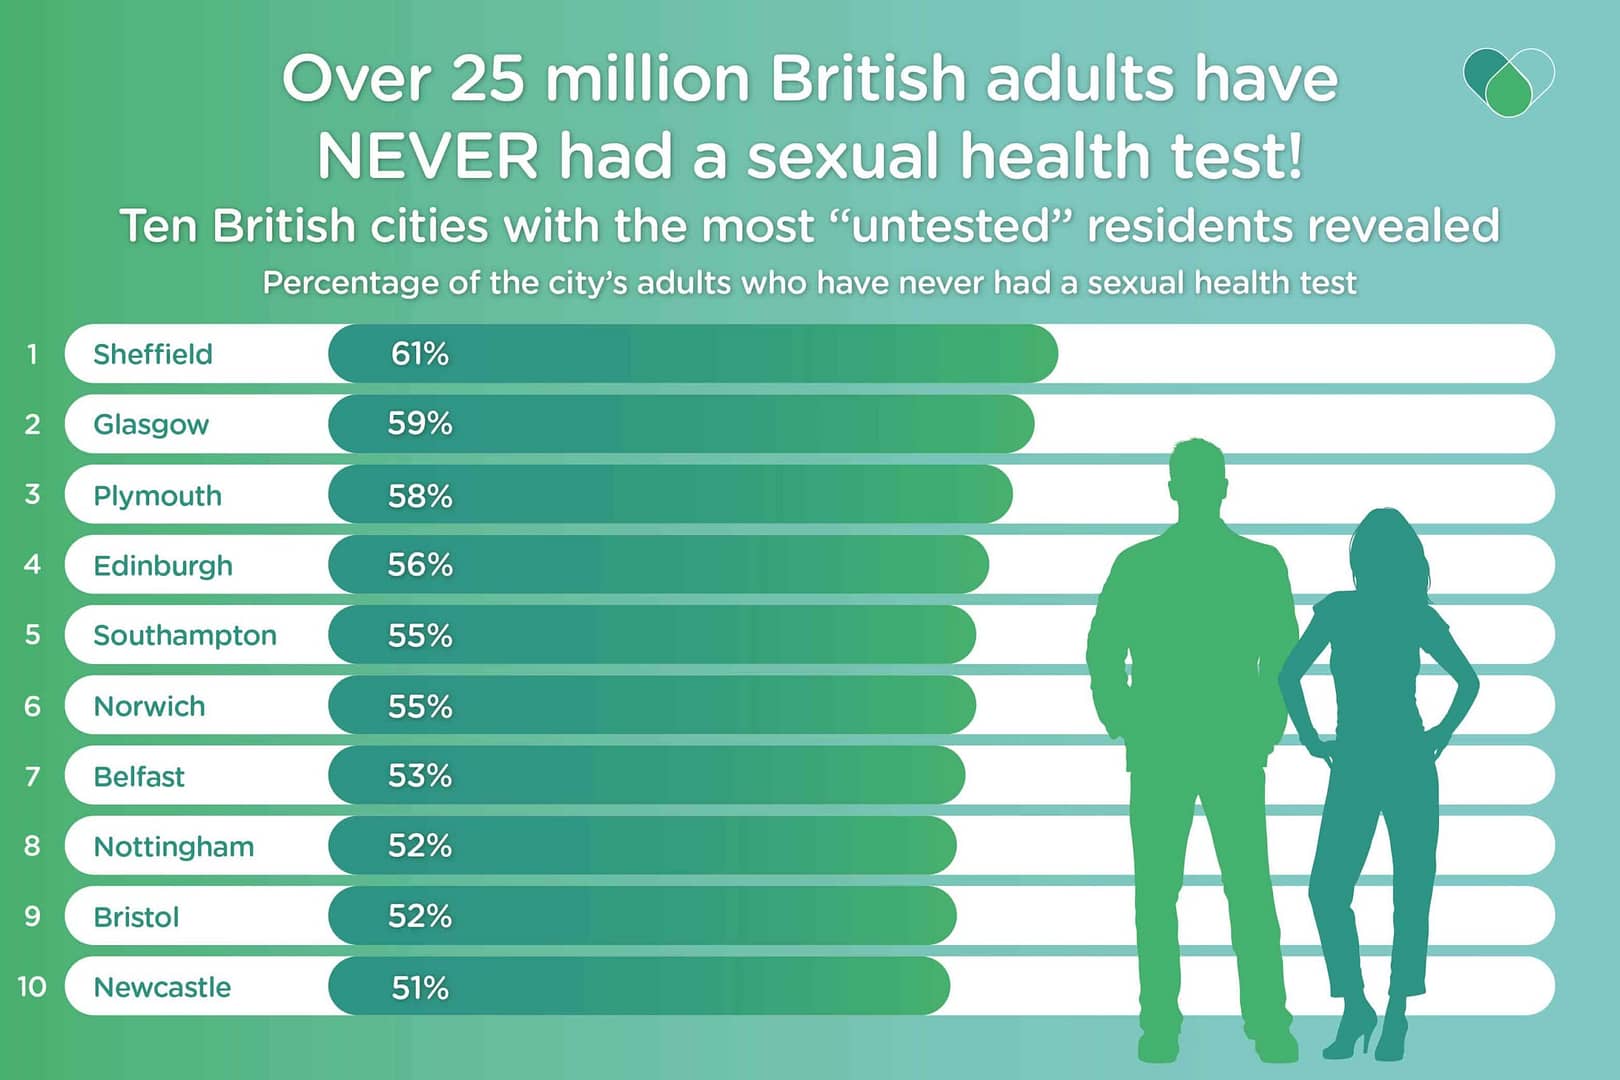 Ten British Cities with the most untested residents